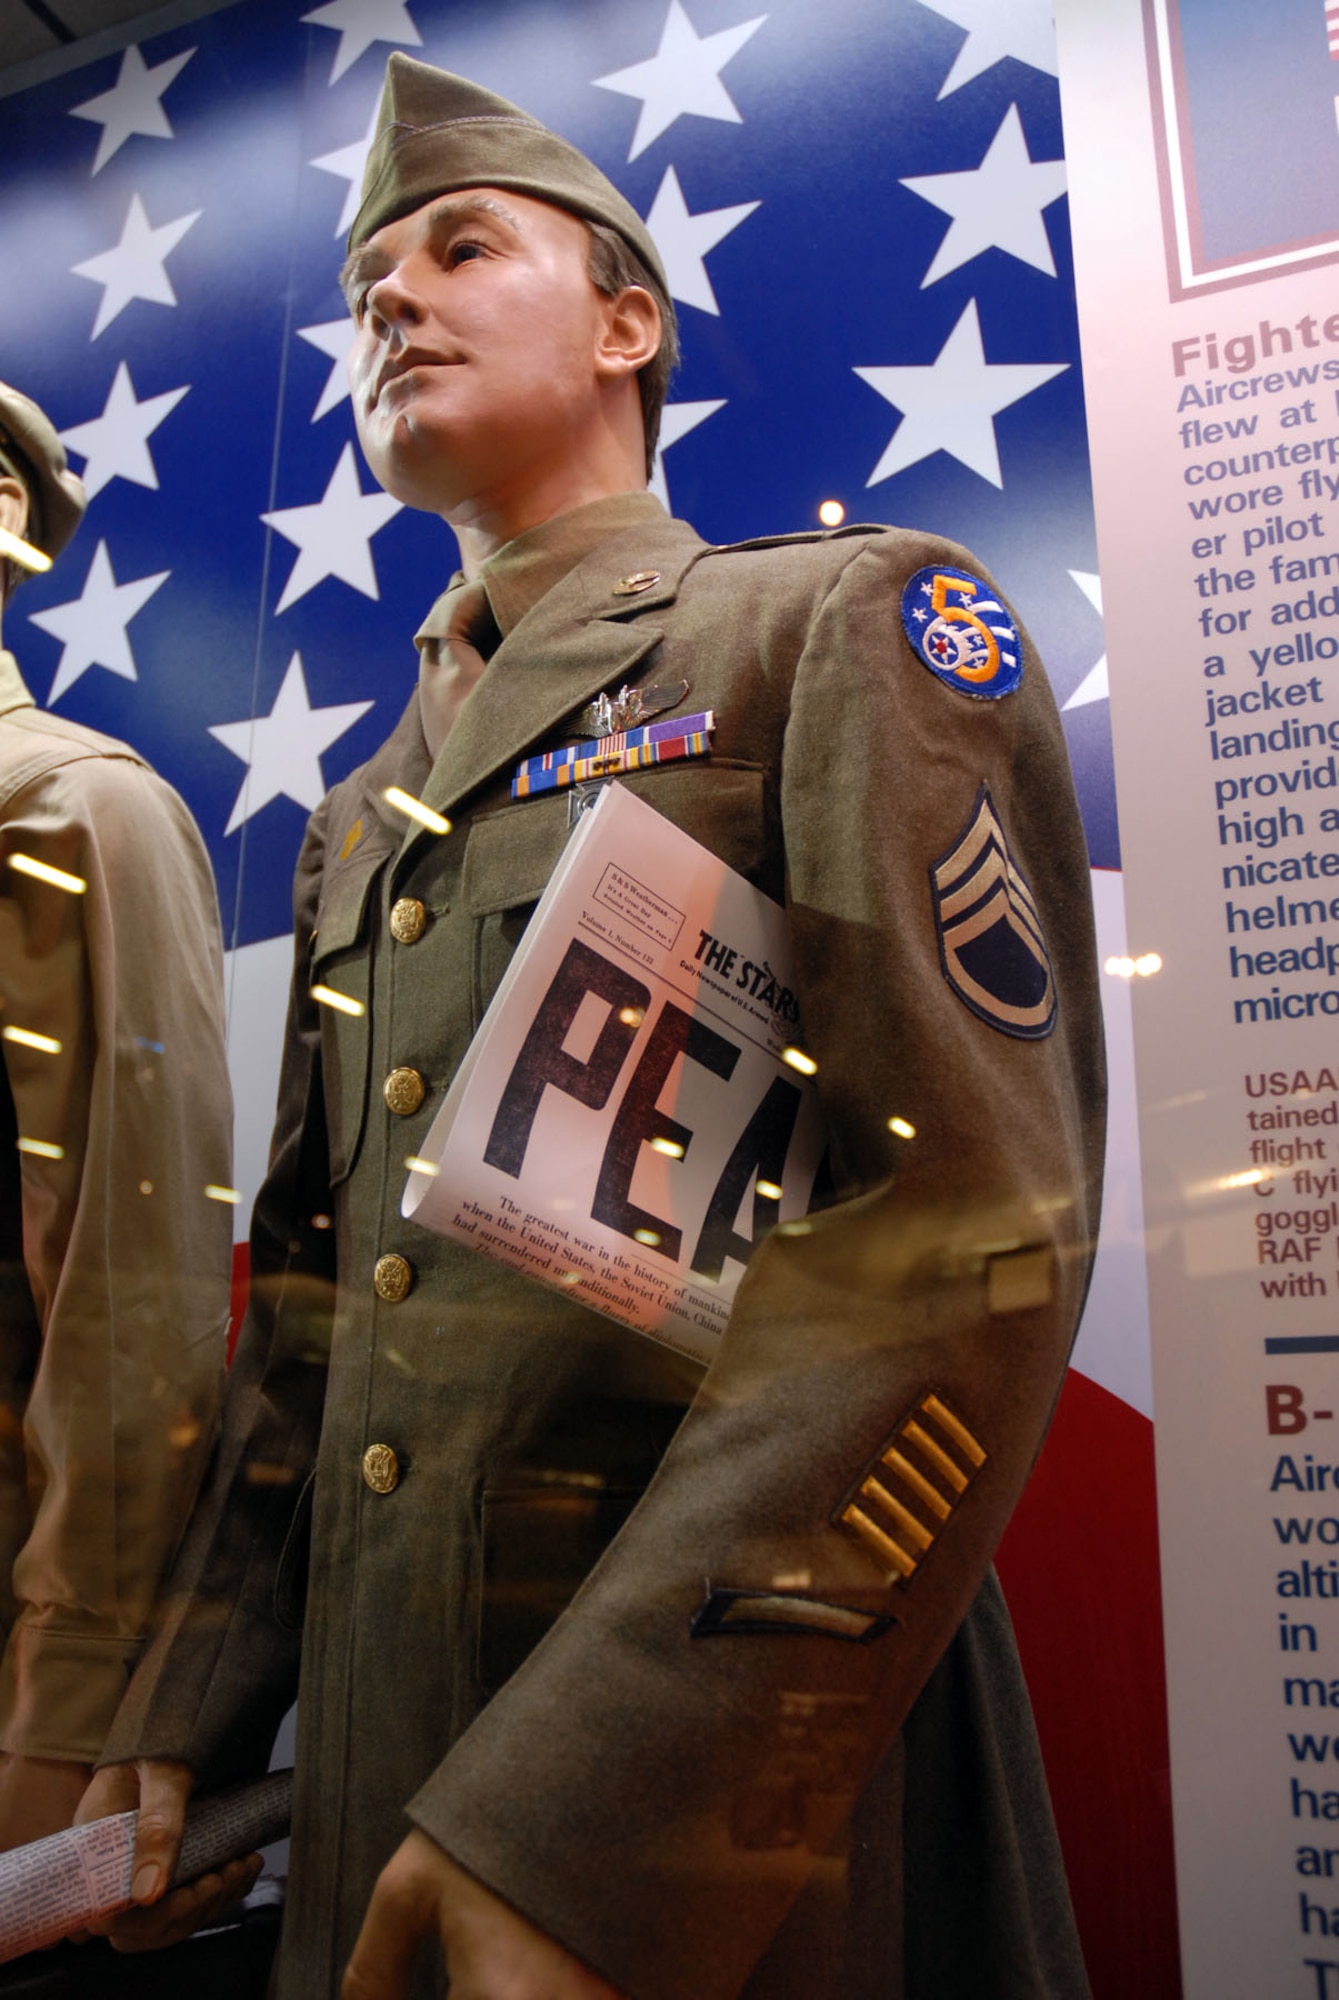 DAYTON, Ohio - The USAAF portion of the WWII: Airmen in a World at War exhibit in the World War II Gallery at the National Museum of the U.S. Air Force. (U.S. Air Force photo) 